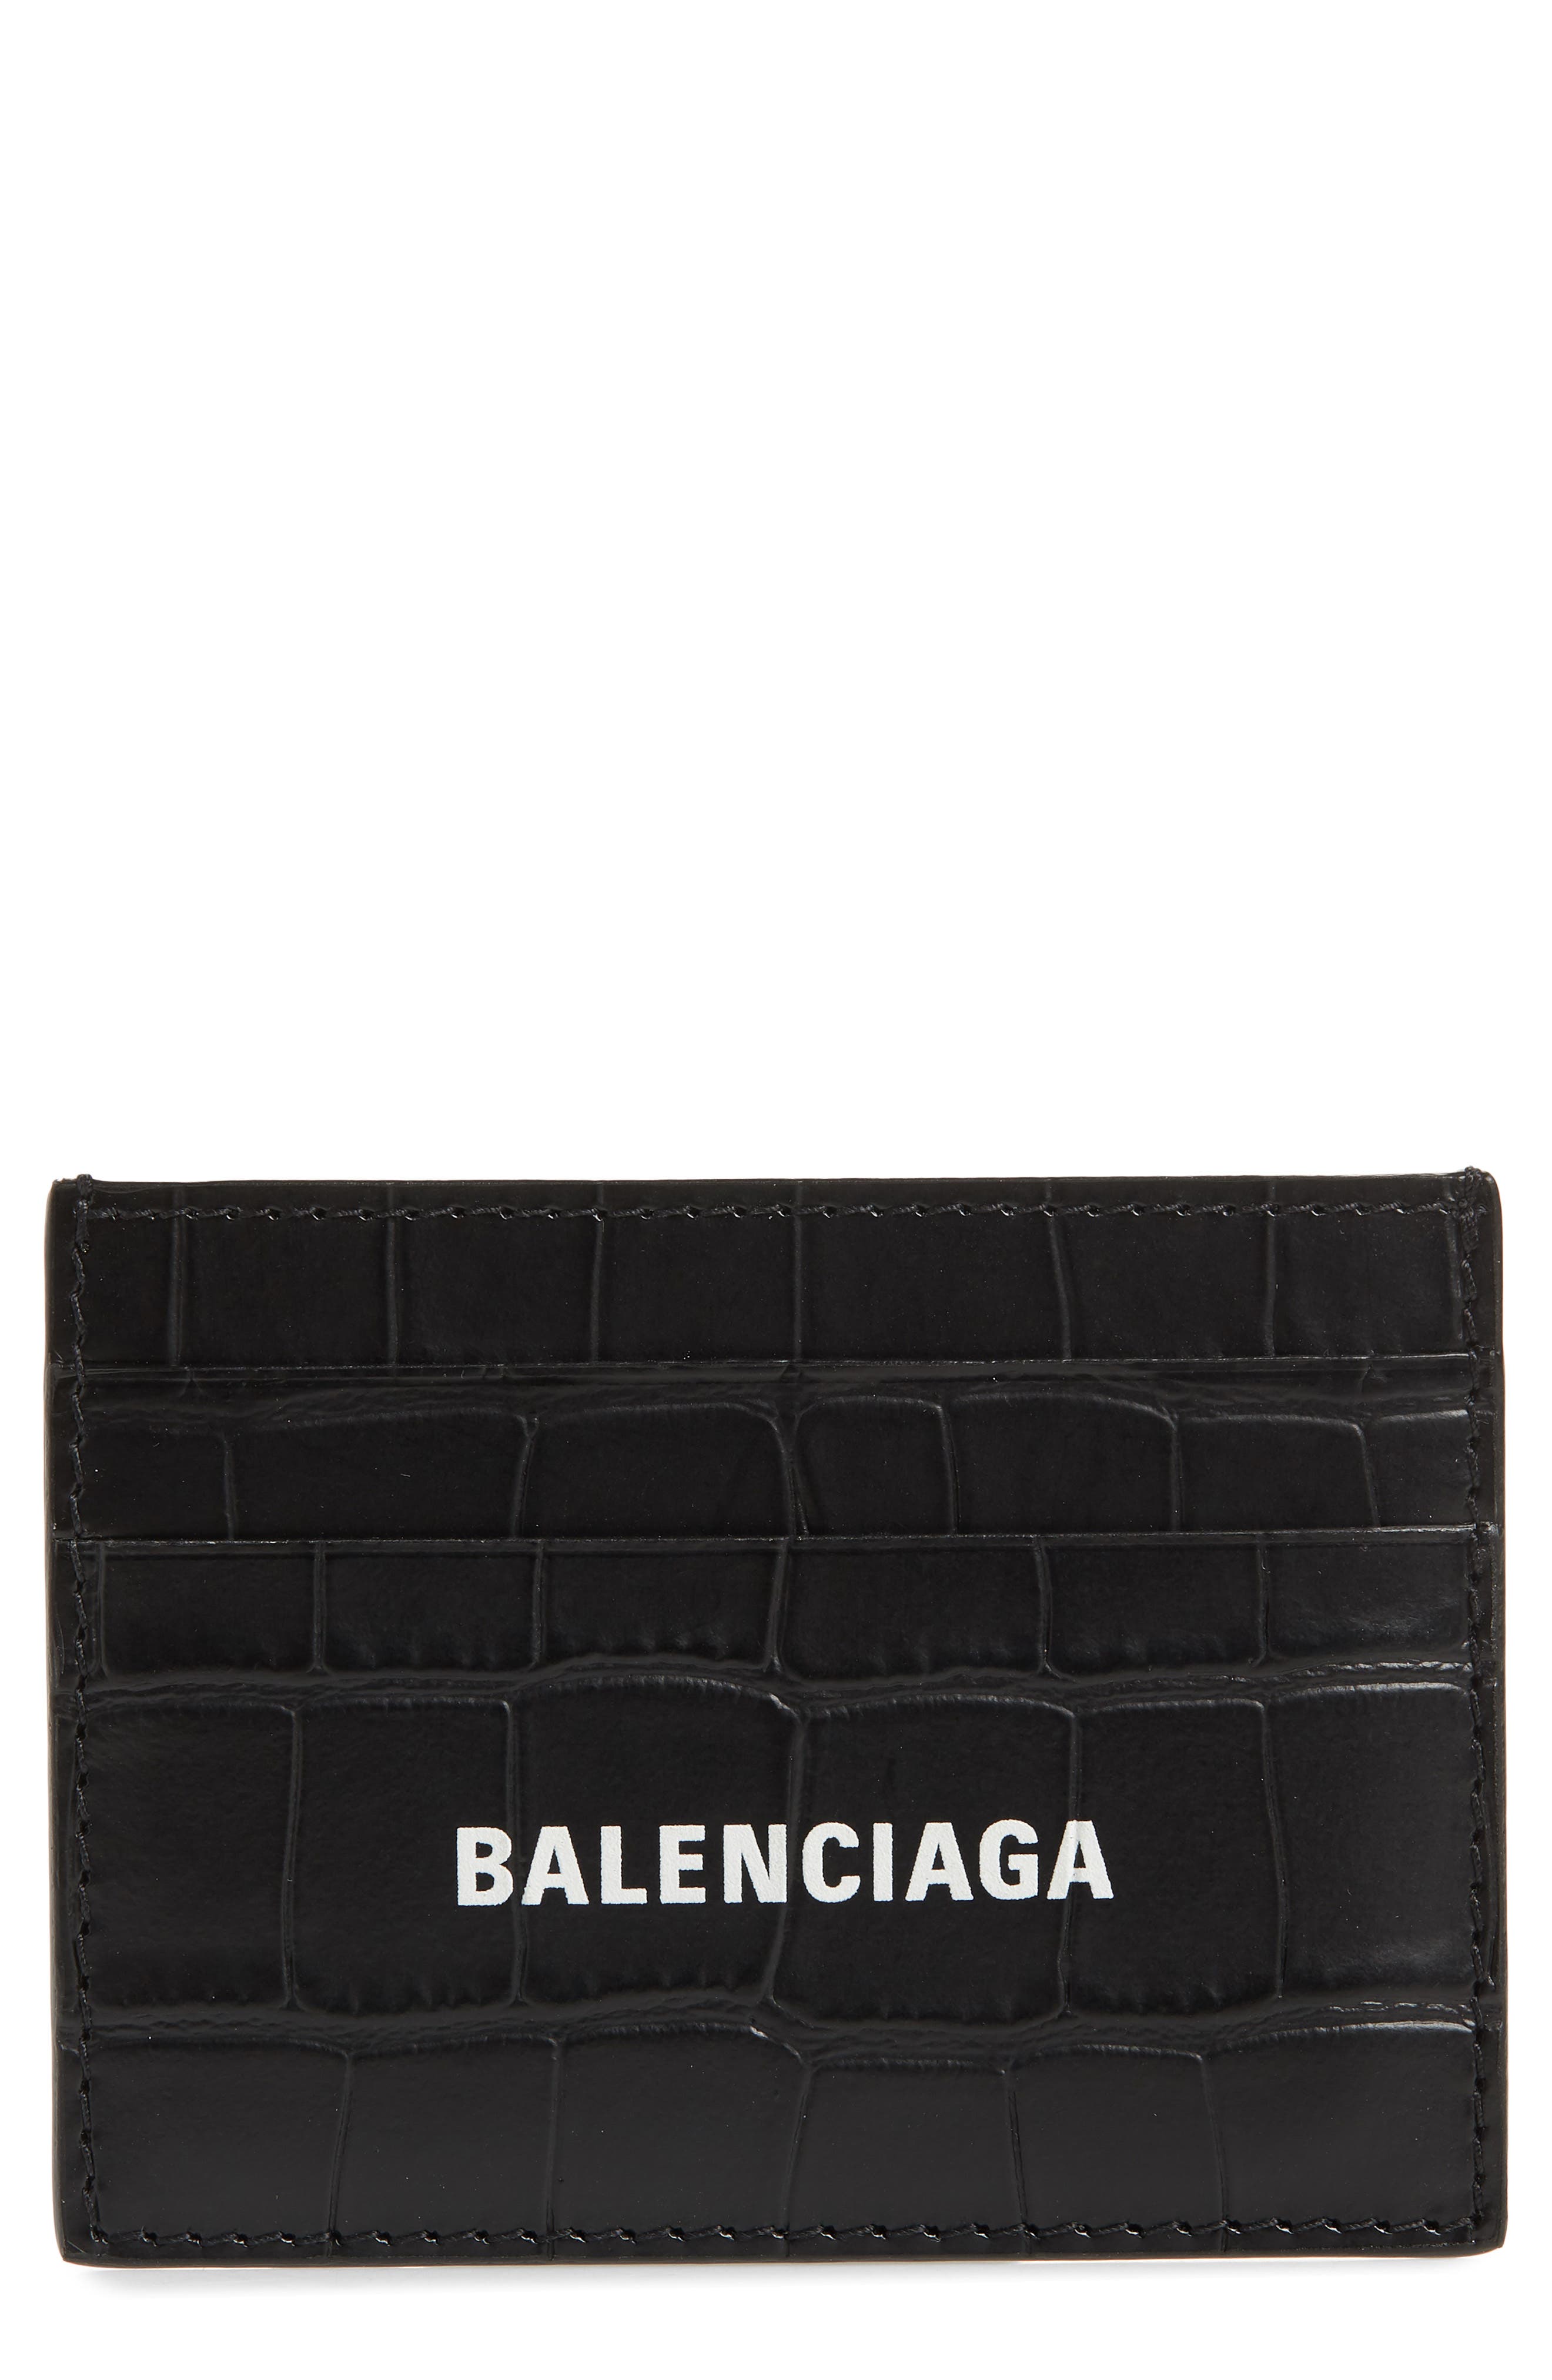 Balenciaga Logo Croc Embossed Leather Card Case in Black at Nordstrom